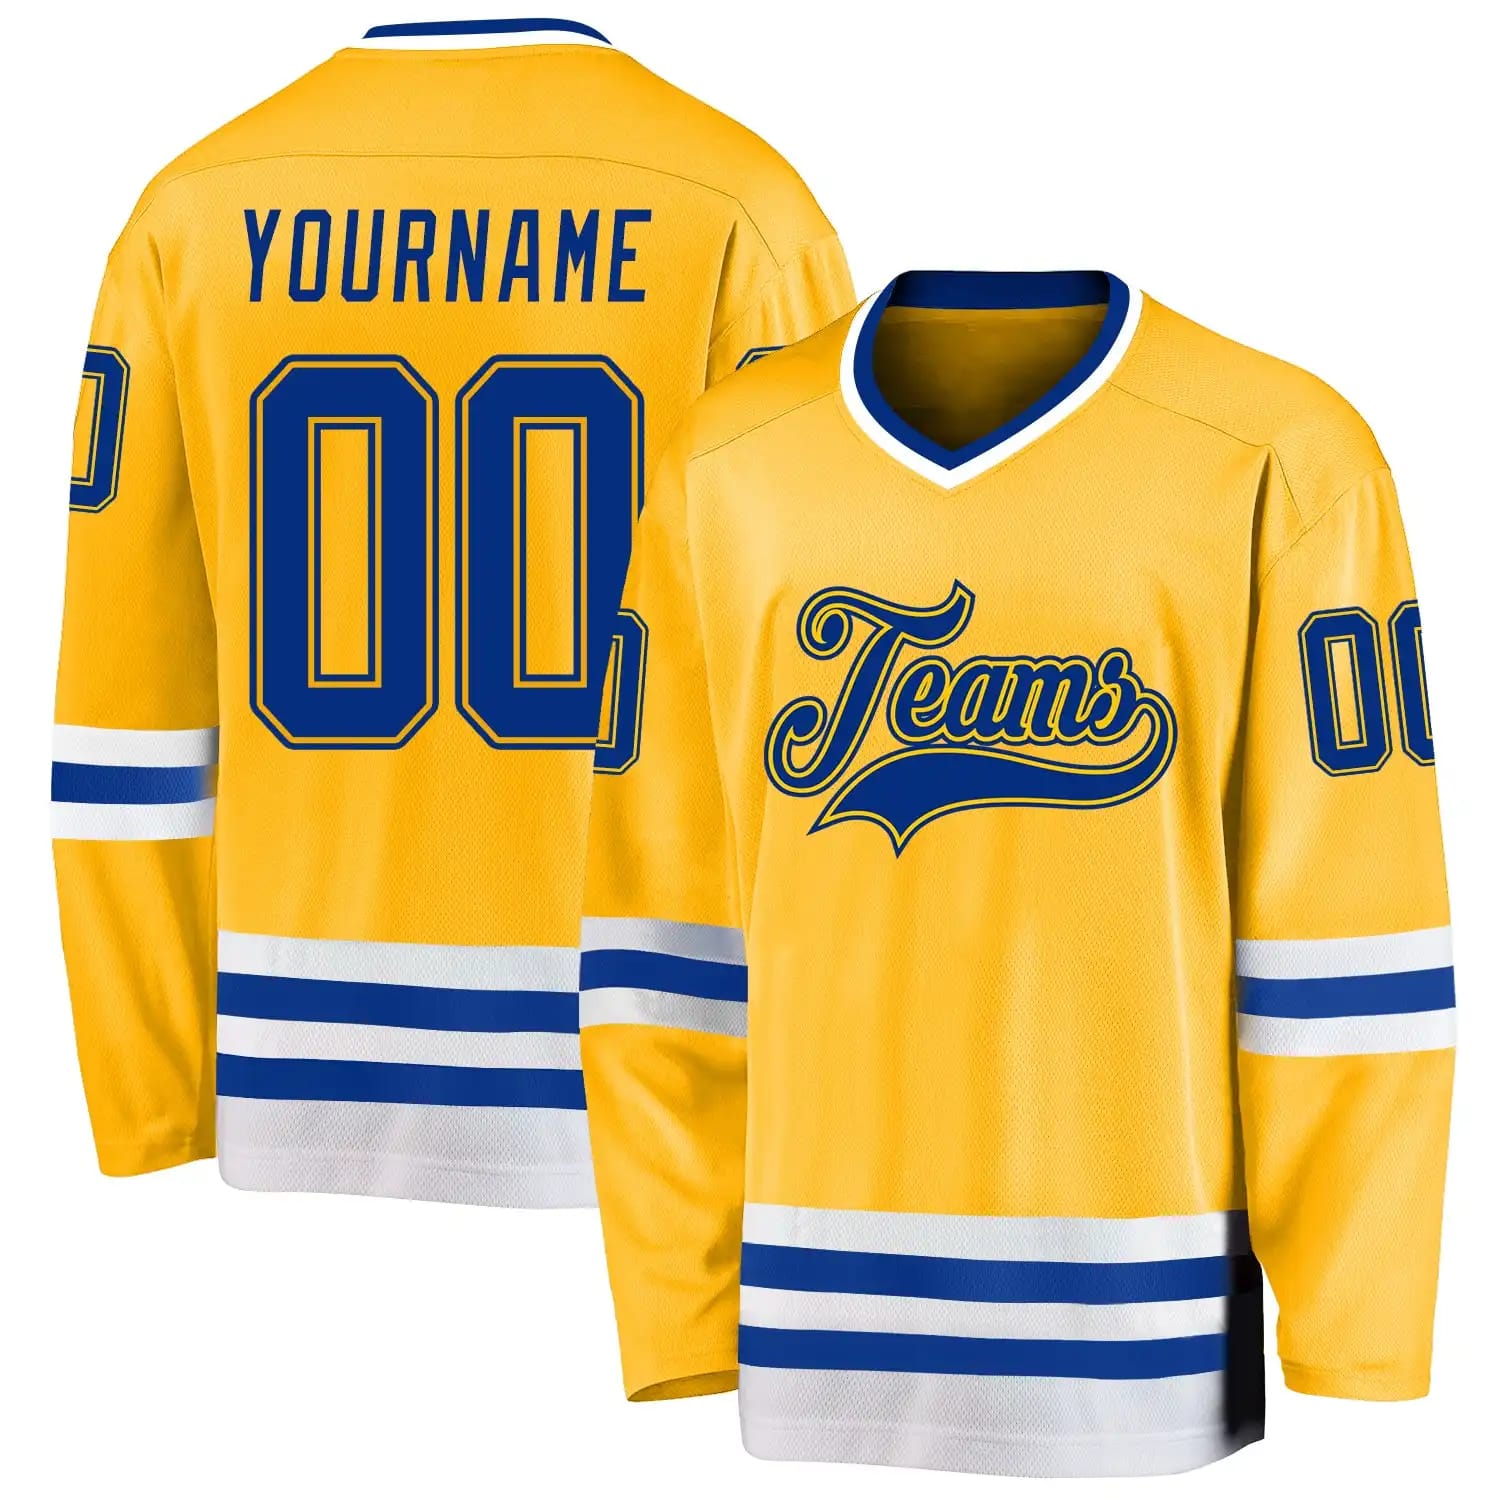 Stitched And Print Gold Royal-white Hockey Jersey Custom